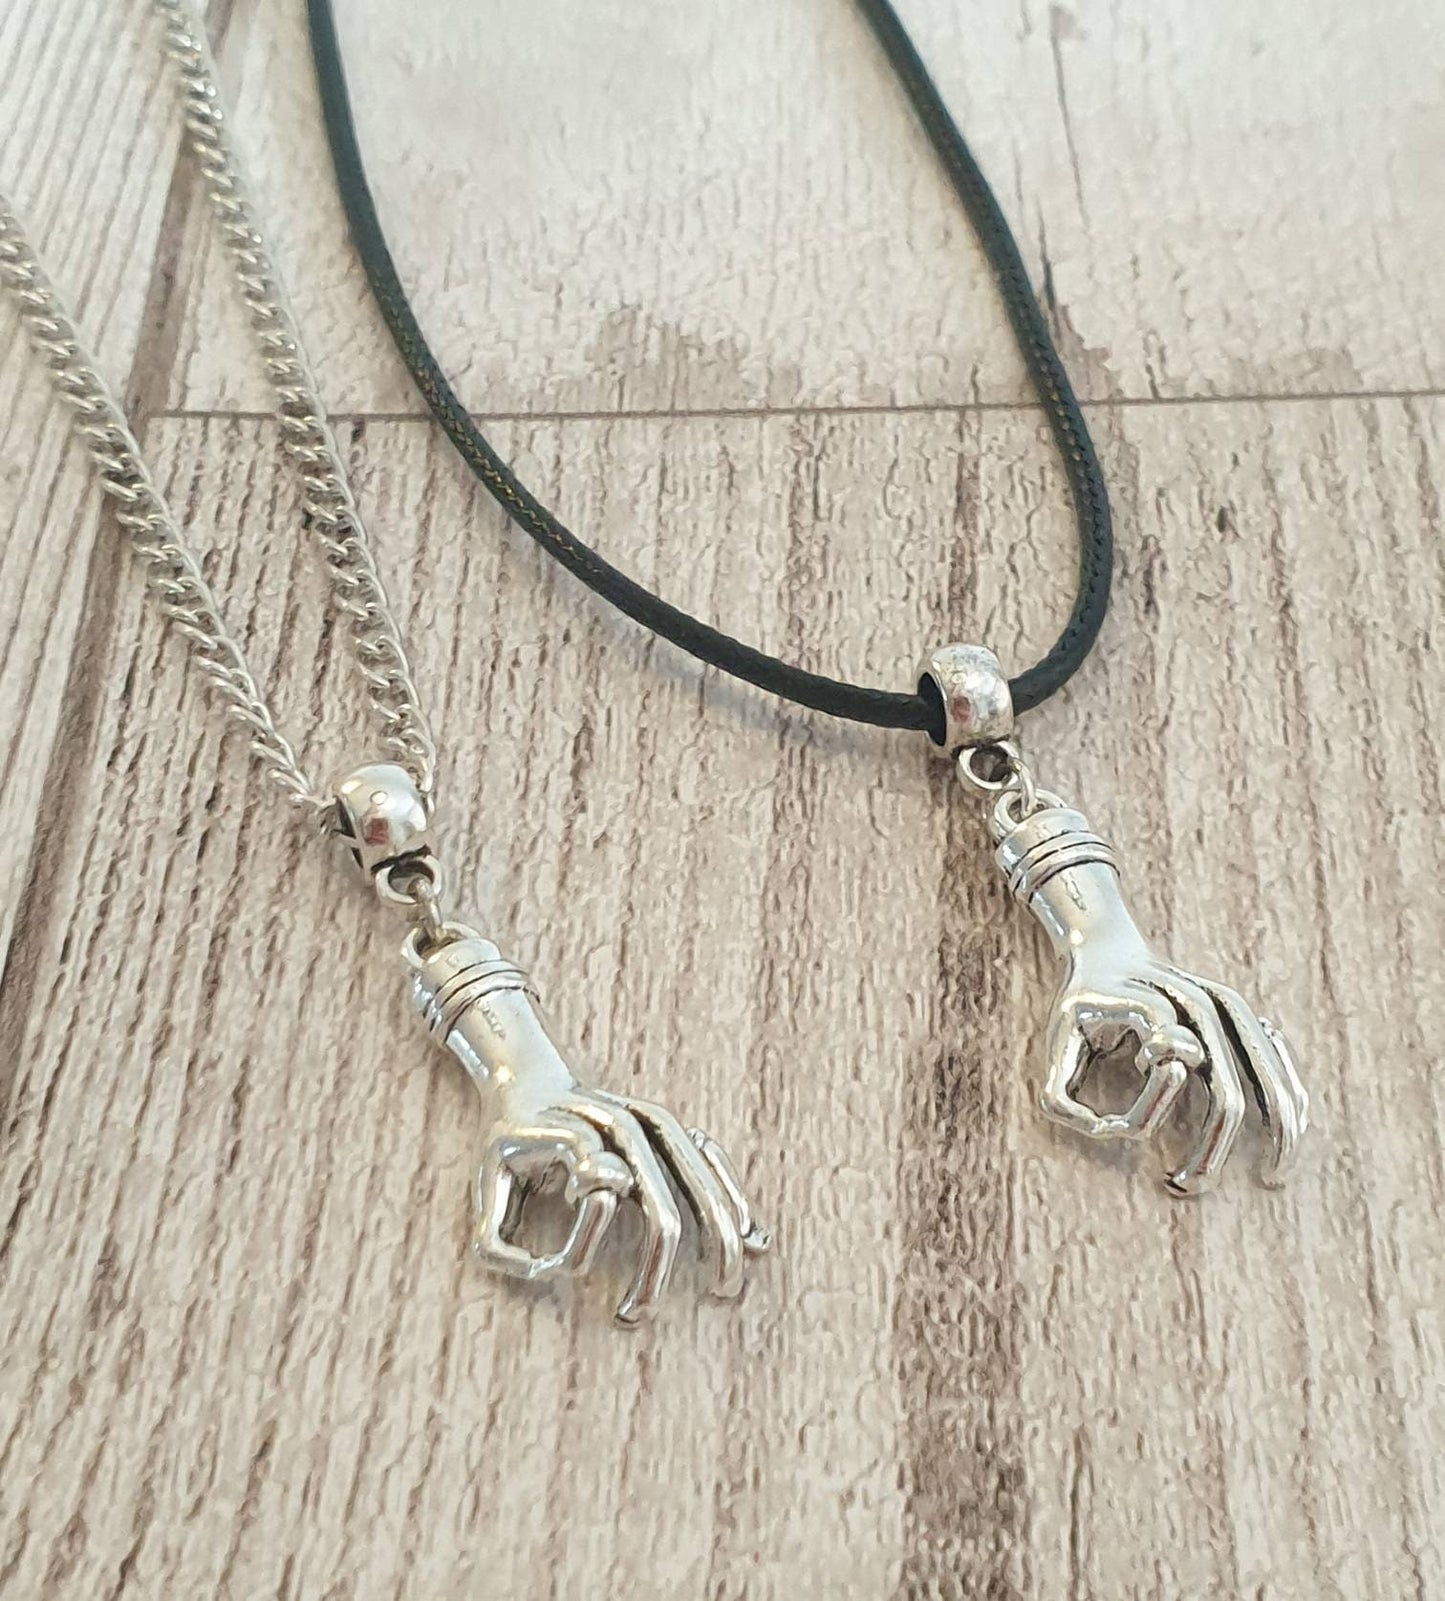 Handmade Antique Silver Hand Charm Necklace Silver Plated Or Waxed Cord Variable Lengths, Gift Packaged, Wednesday Inspired, Thing Hand - Premium  from Etsy - Just £5.49! Shop now at Uniquely Holt